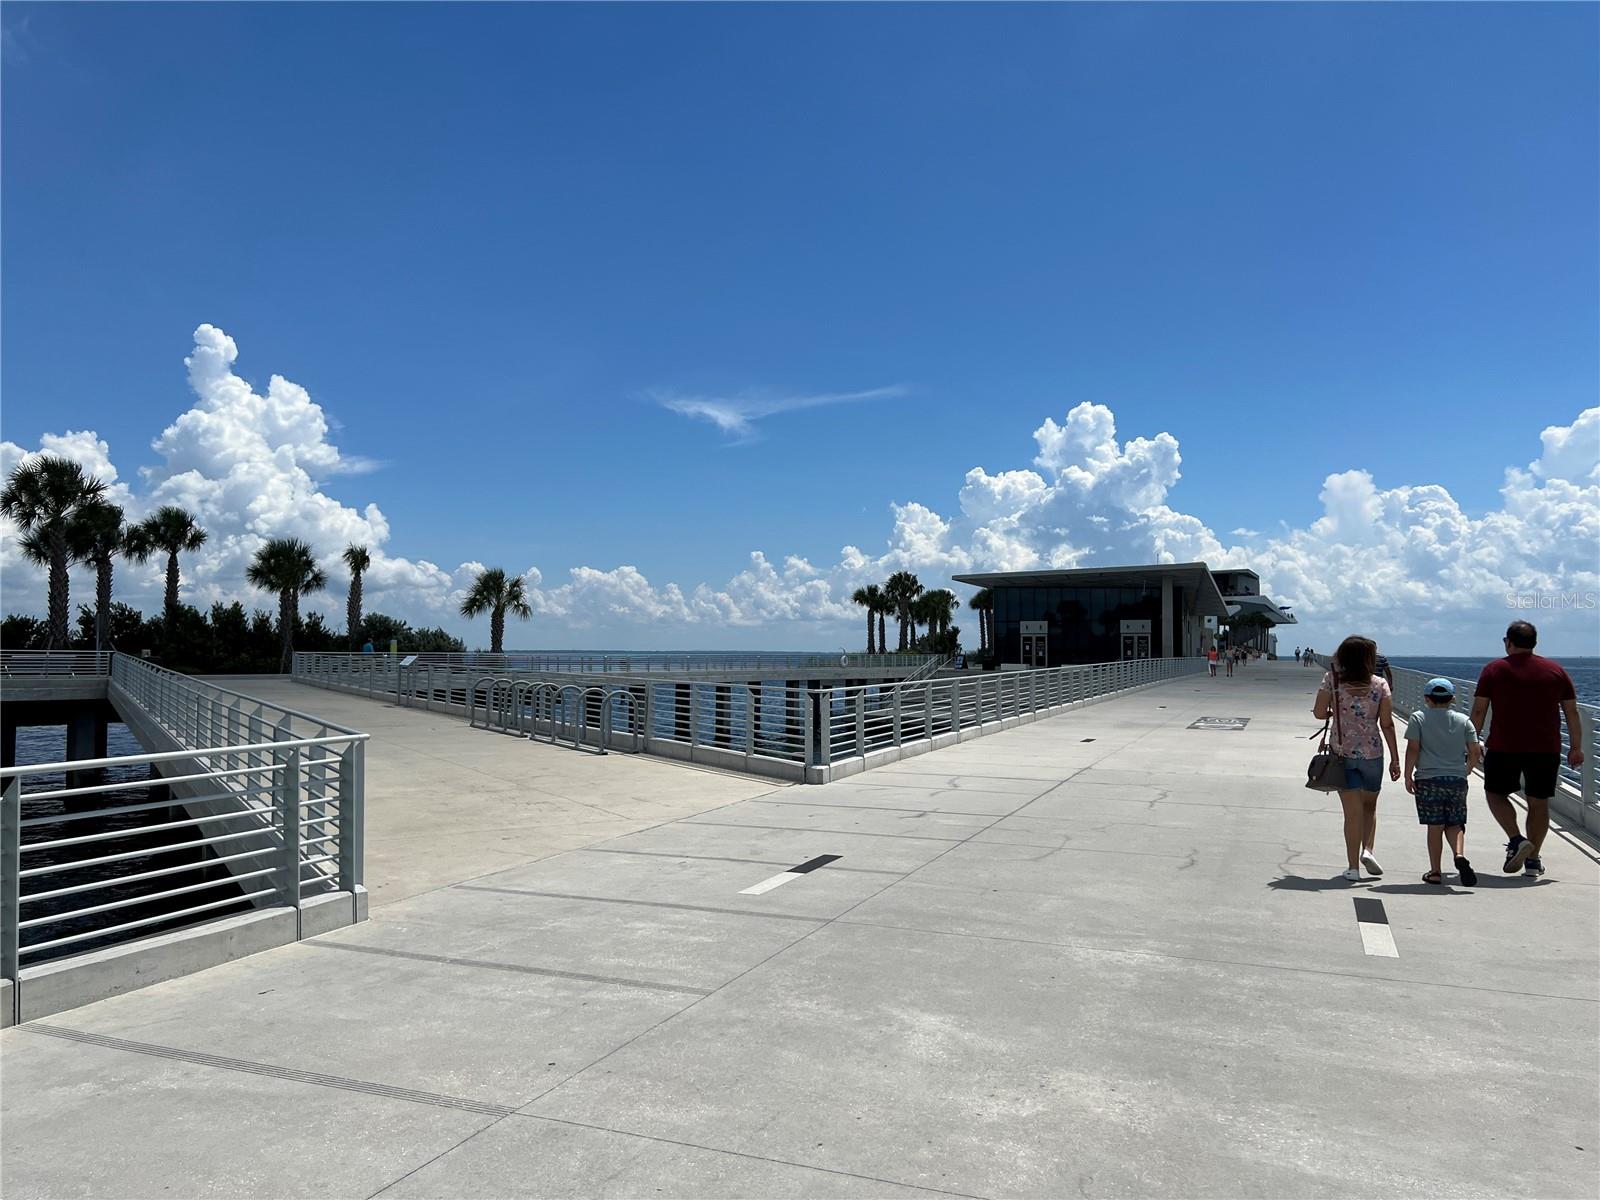 The new St Pete Pier has dining and entertainment!